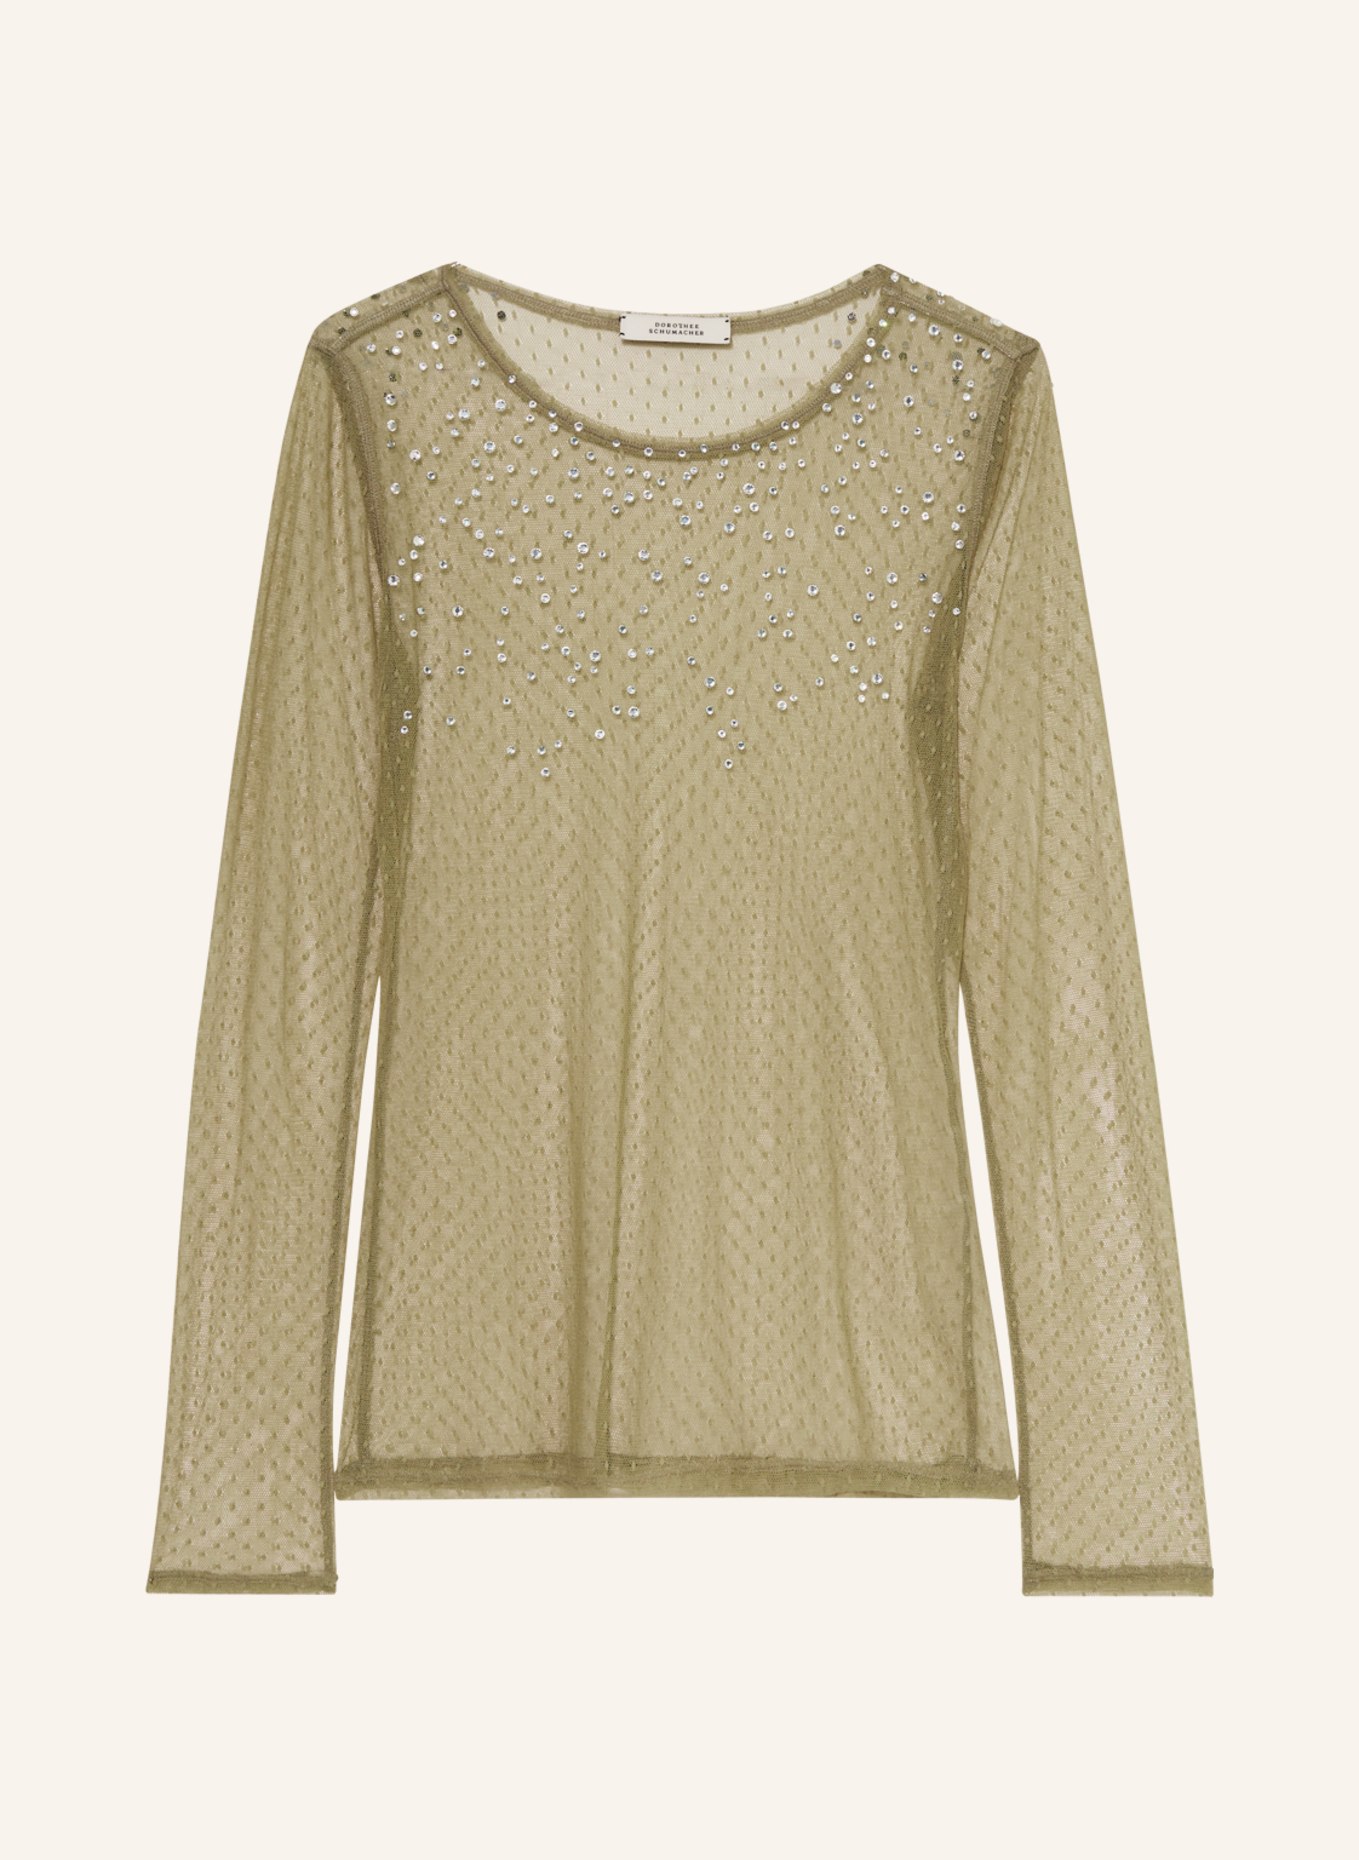 DOROTHEE SCHUMACHER Long sleeve shirt made of mesh with glittering stones, Color: KHAKI (Image 1)